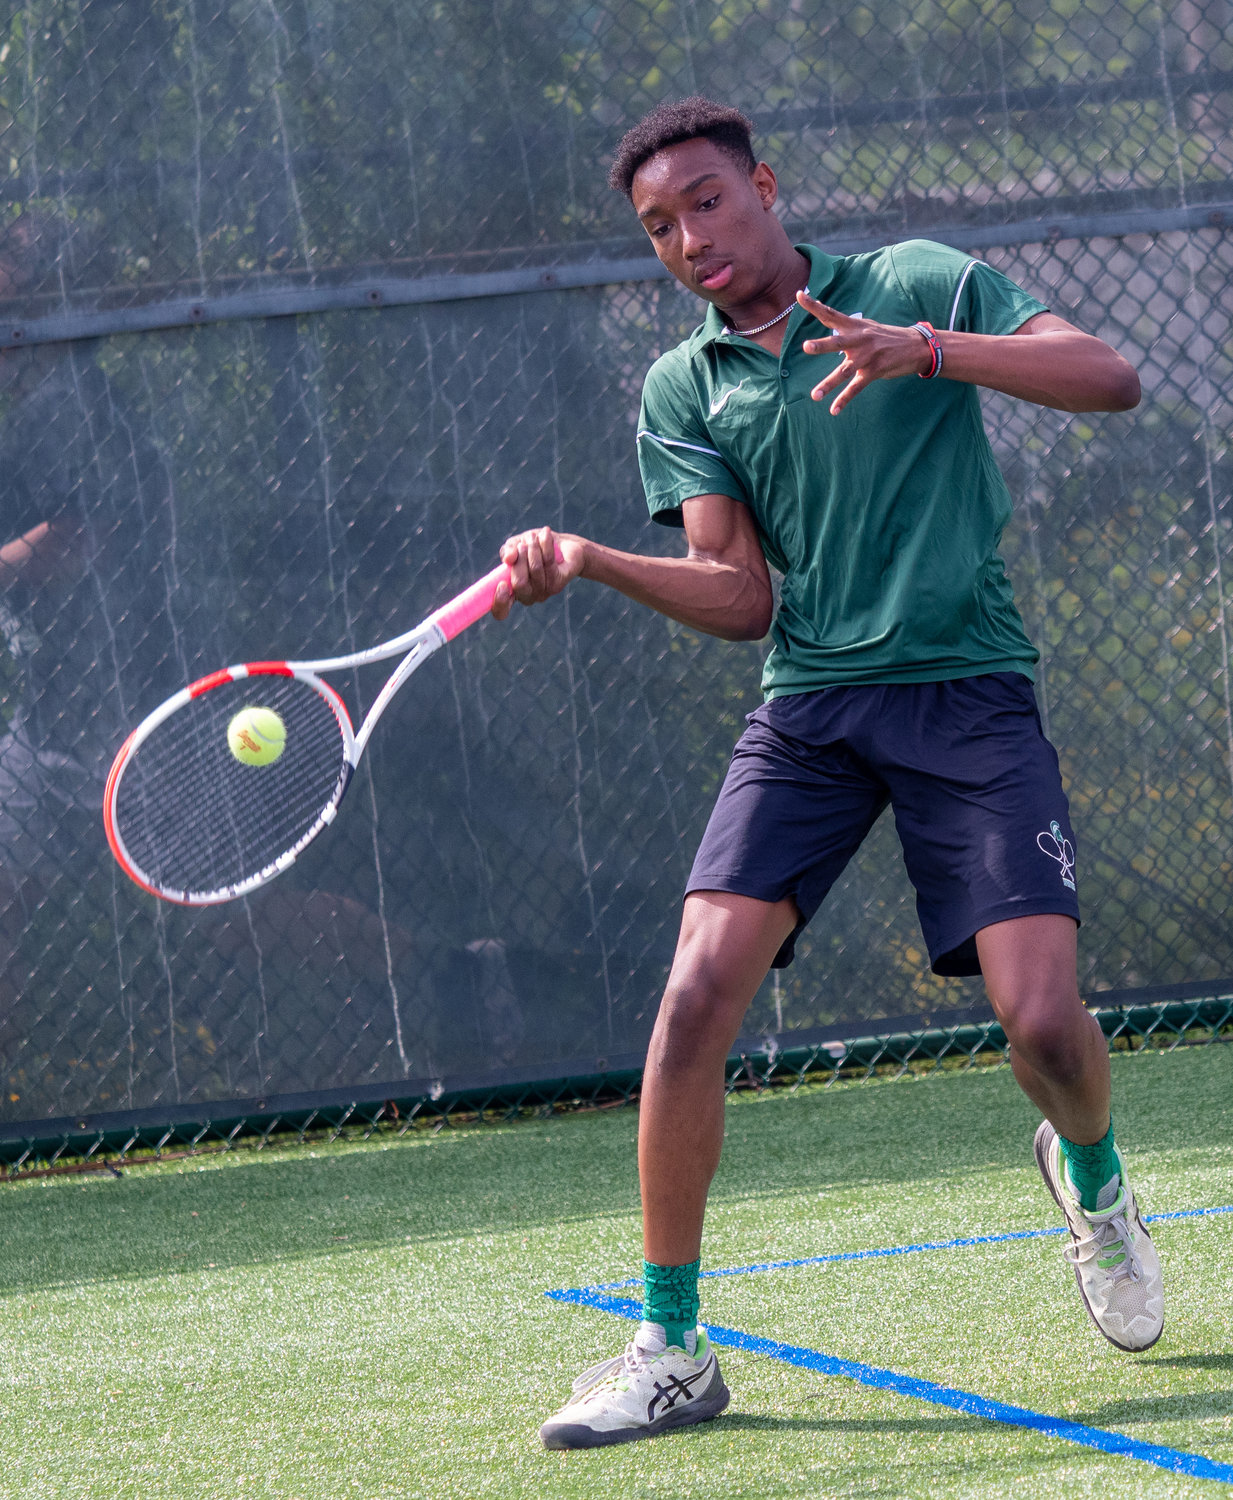 Senior Daniel Ellis went 12-2 at first singles to help lead the Spartans to their first conference crown in 13 years.